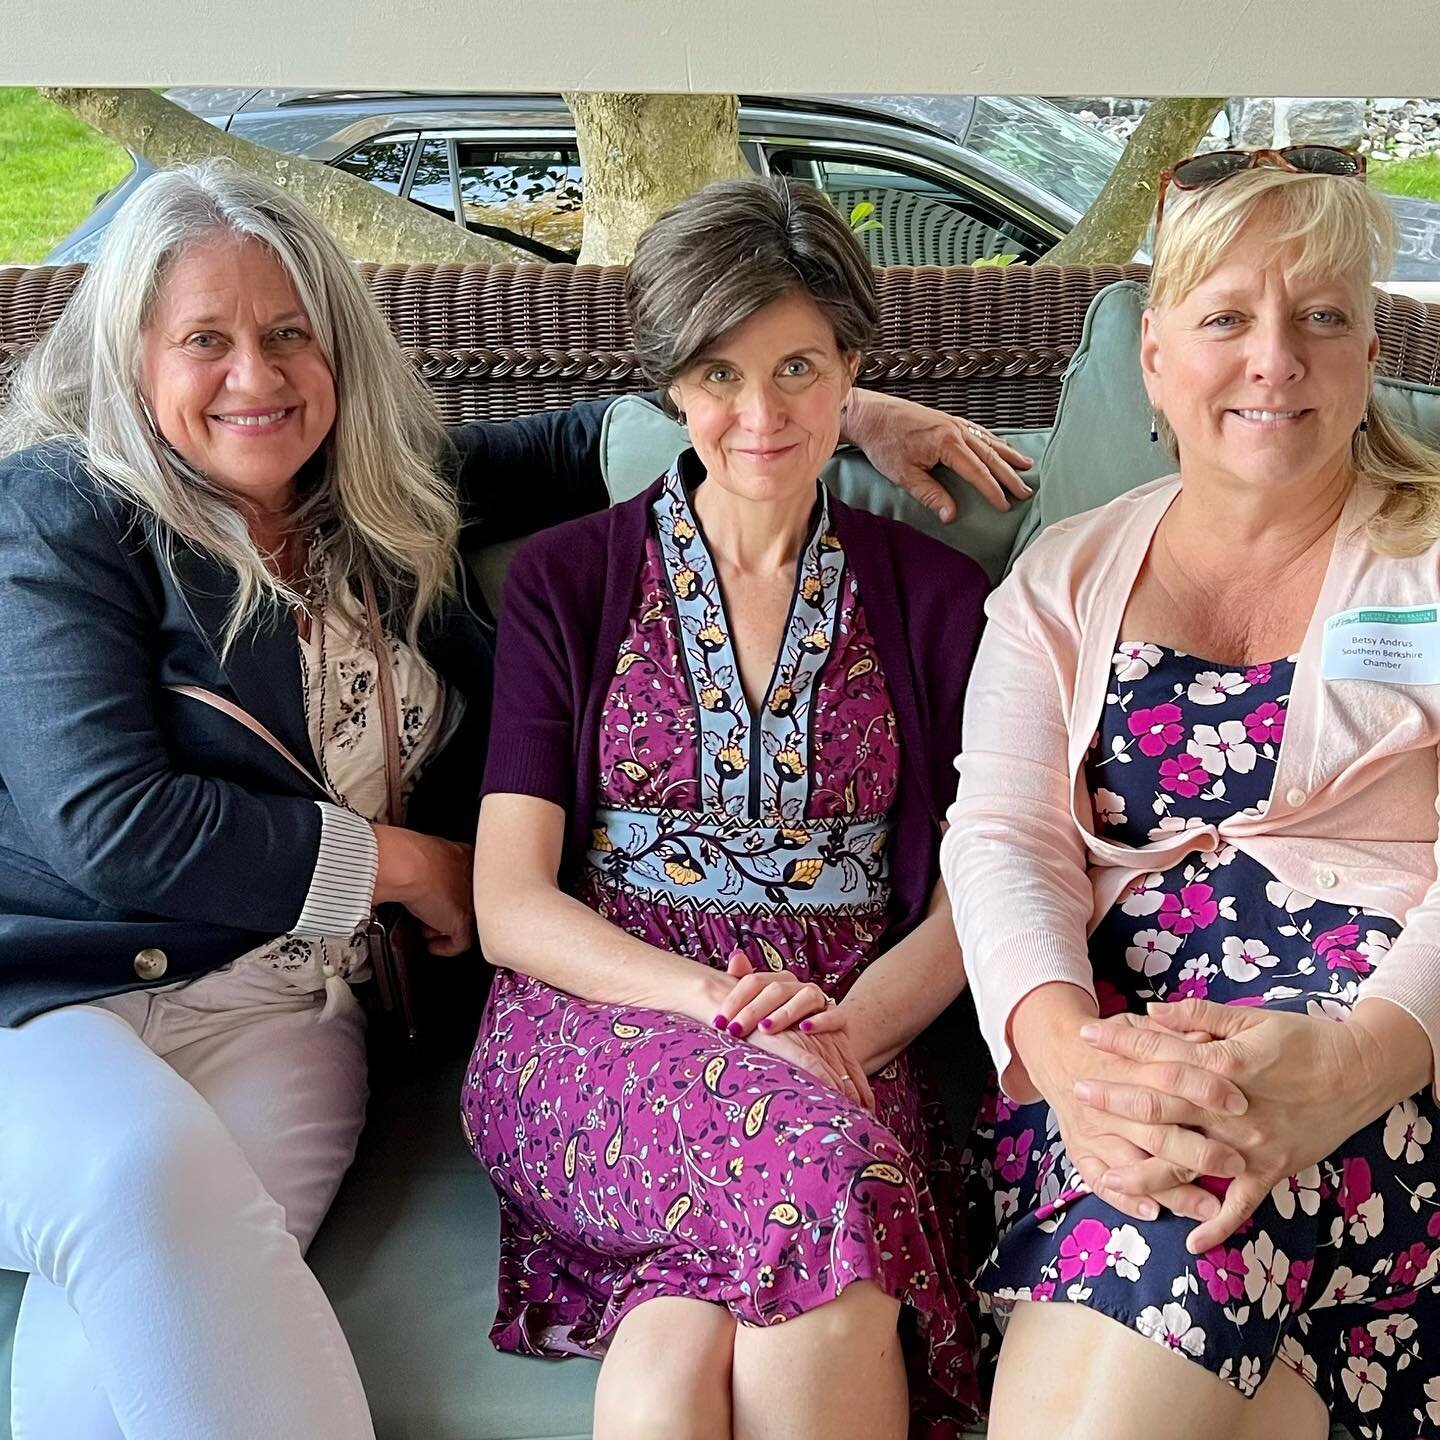 I was happy to sit and chat with two of my favorite friends last night after the @sberkchamber After Hours gathering hosted by Arienti + Klepetar at @saintjamesplacegb Old Blue Rectory (next to the performing arts space). L - R Cherri Sanes of @extra